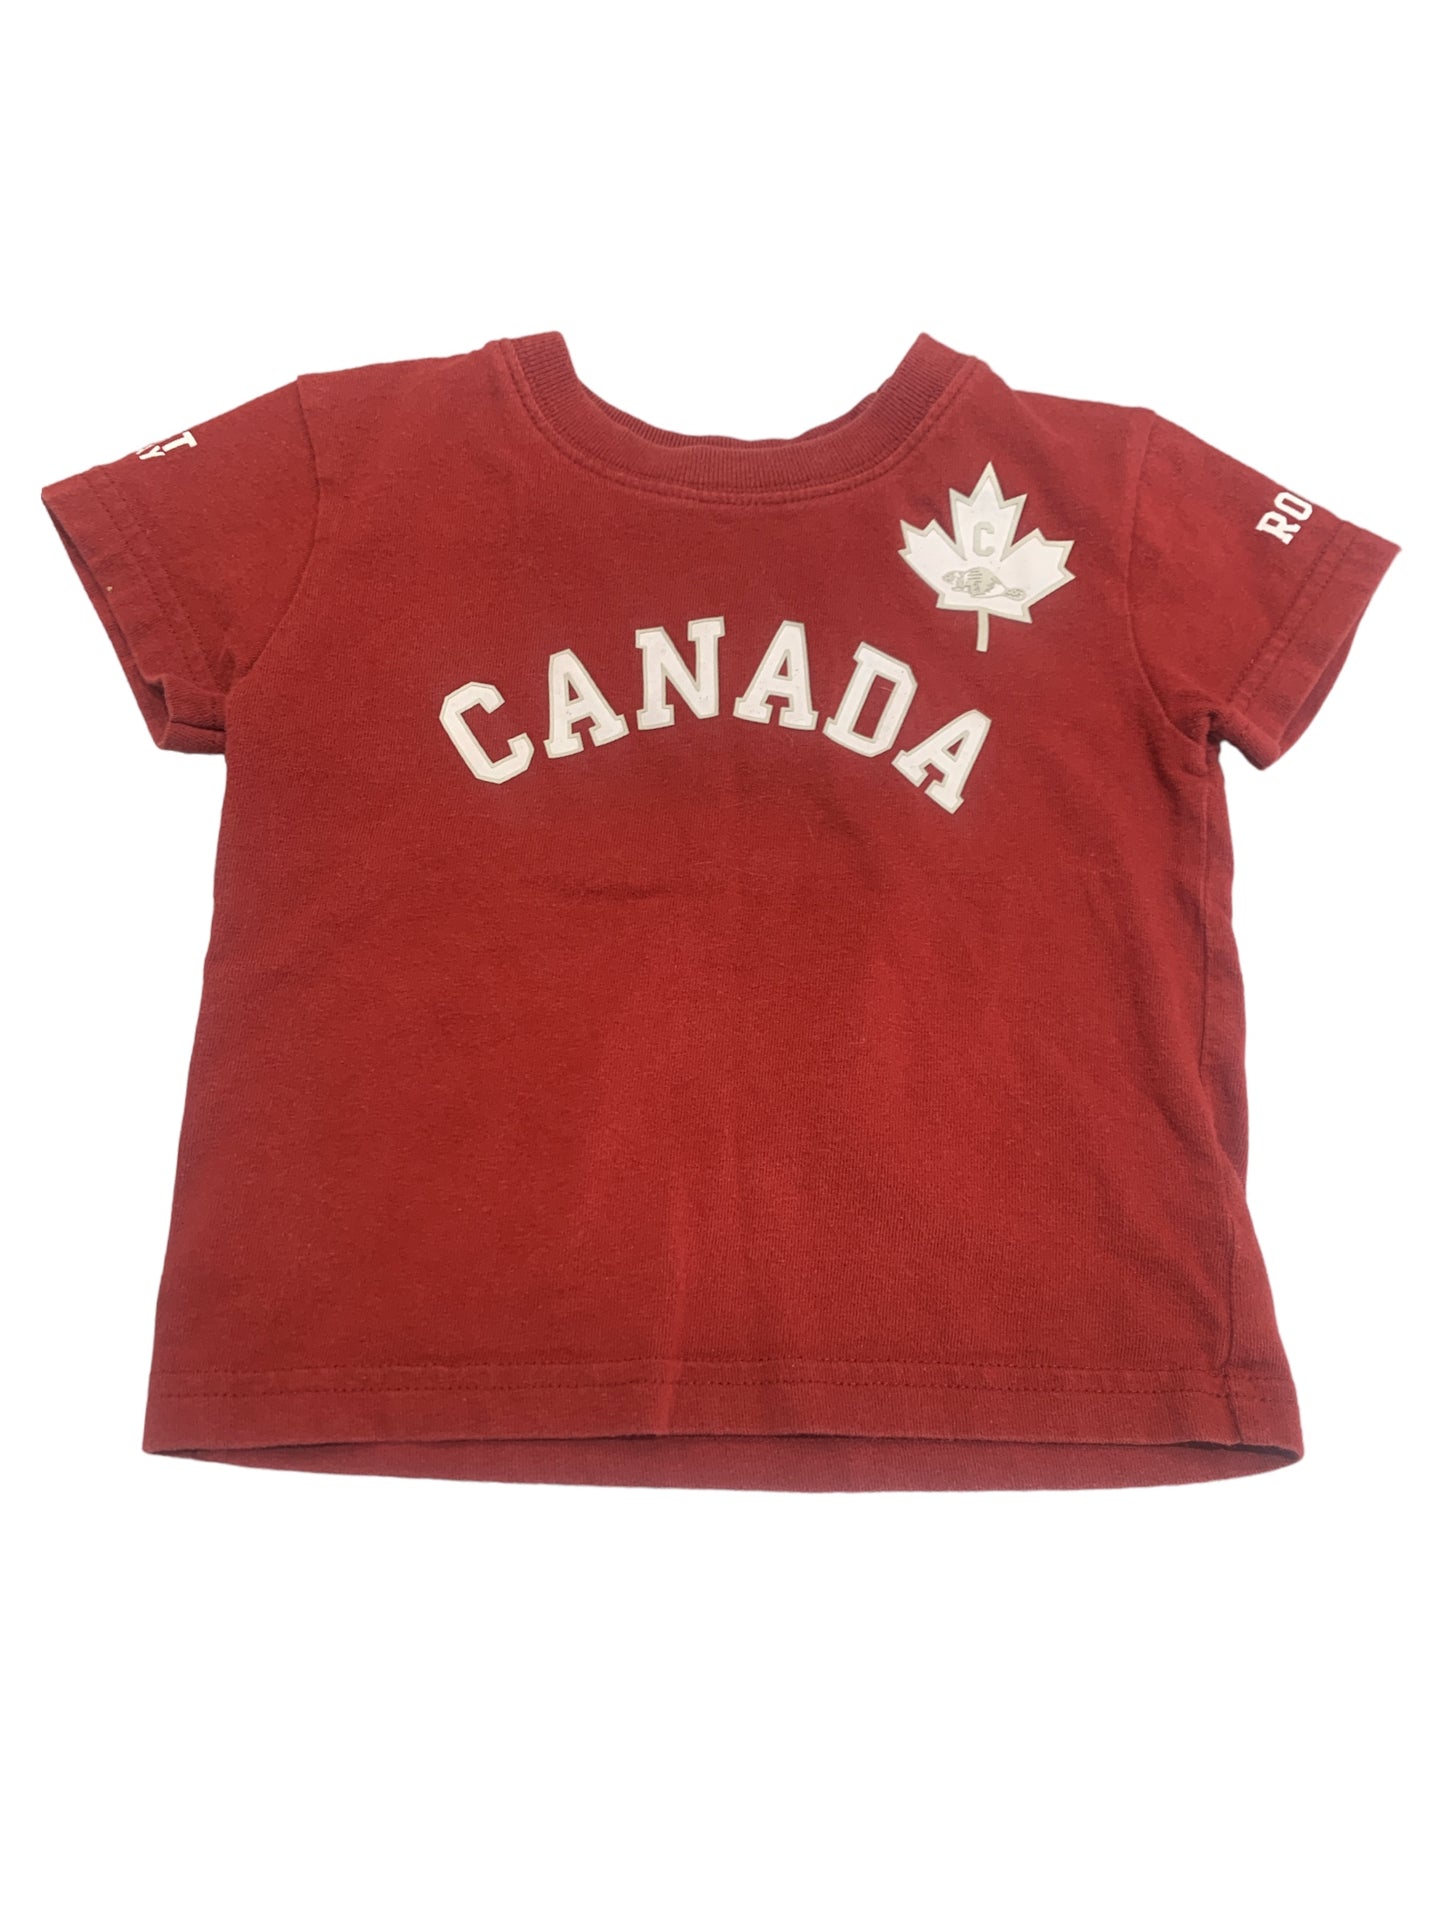 Canada Tee Size 6-12m